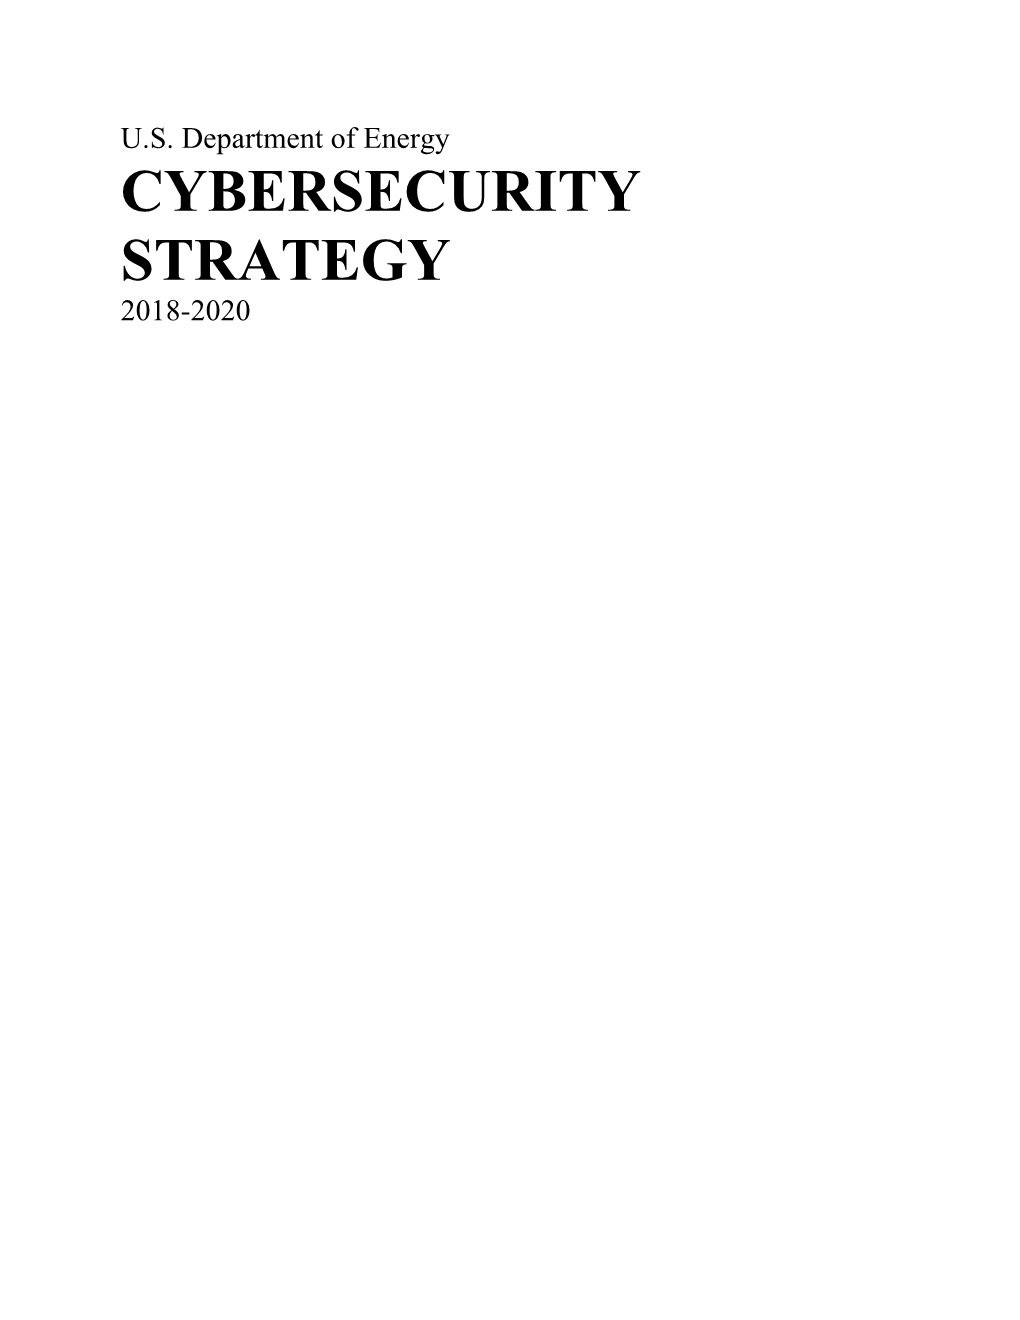 DOE Cybersecurity Strategy and Implementation Plan to Improve the Cybersecurity and Resilience of the Department’S Networks and Systems